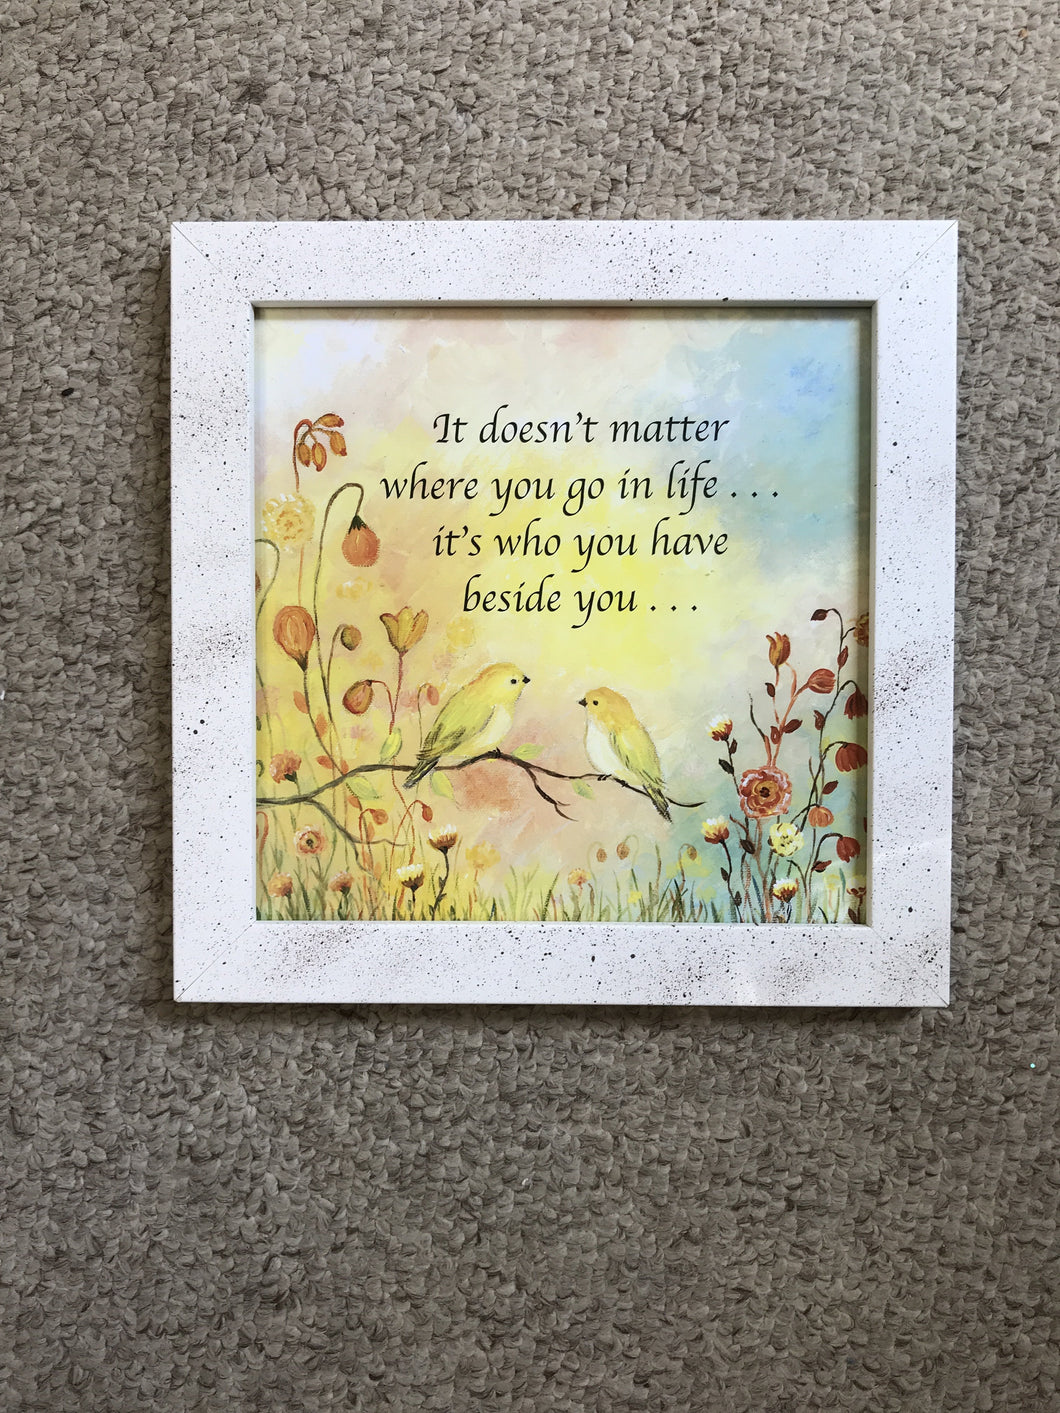 8x8 “yellow bird” quote in white frame